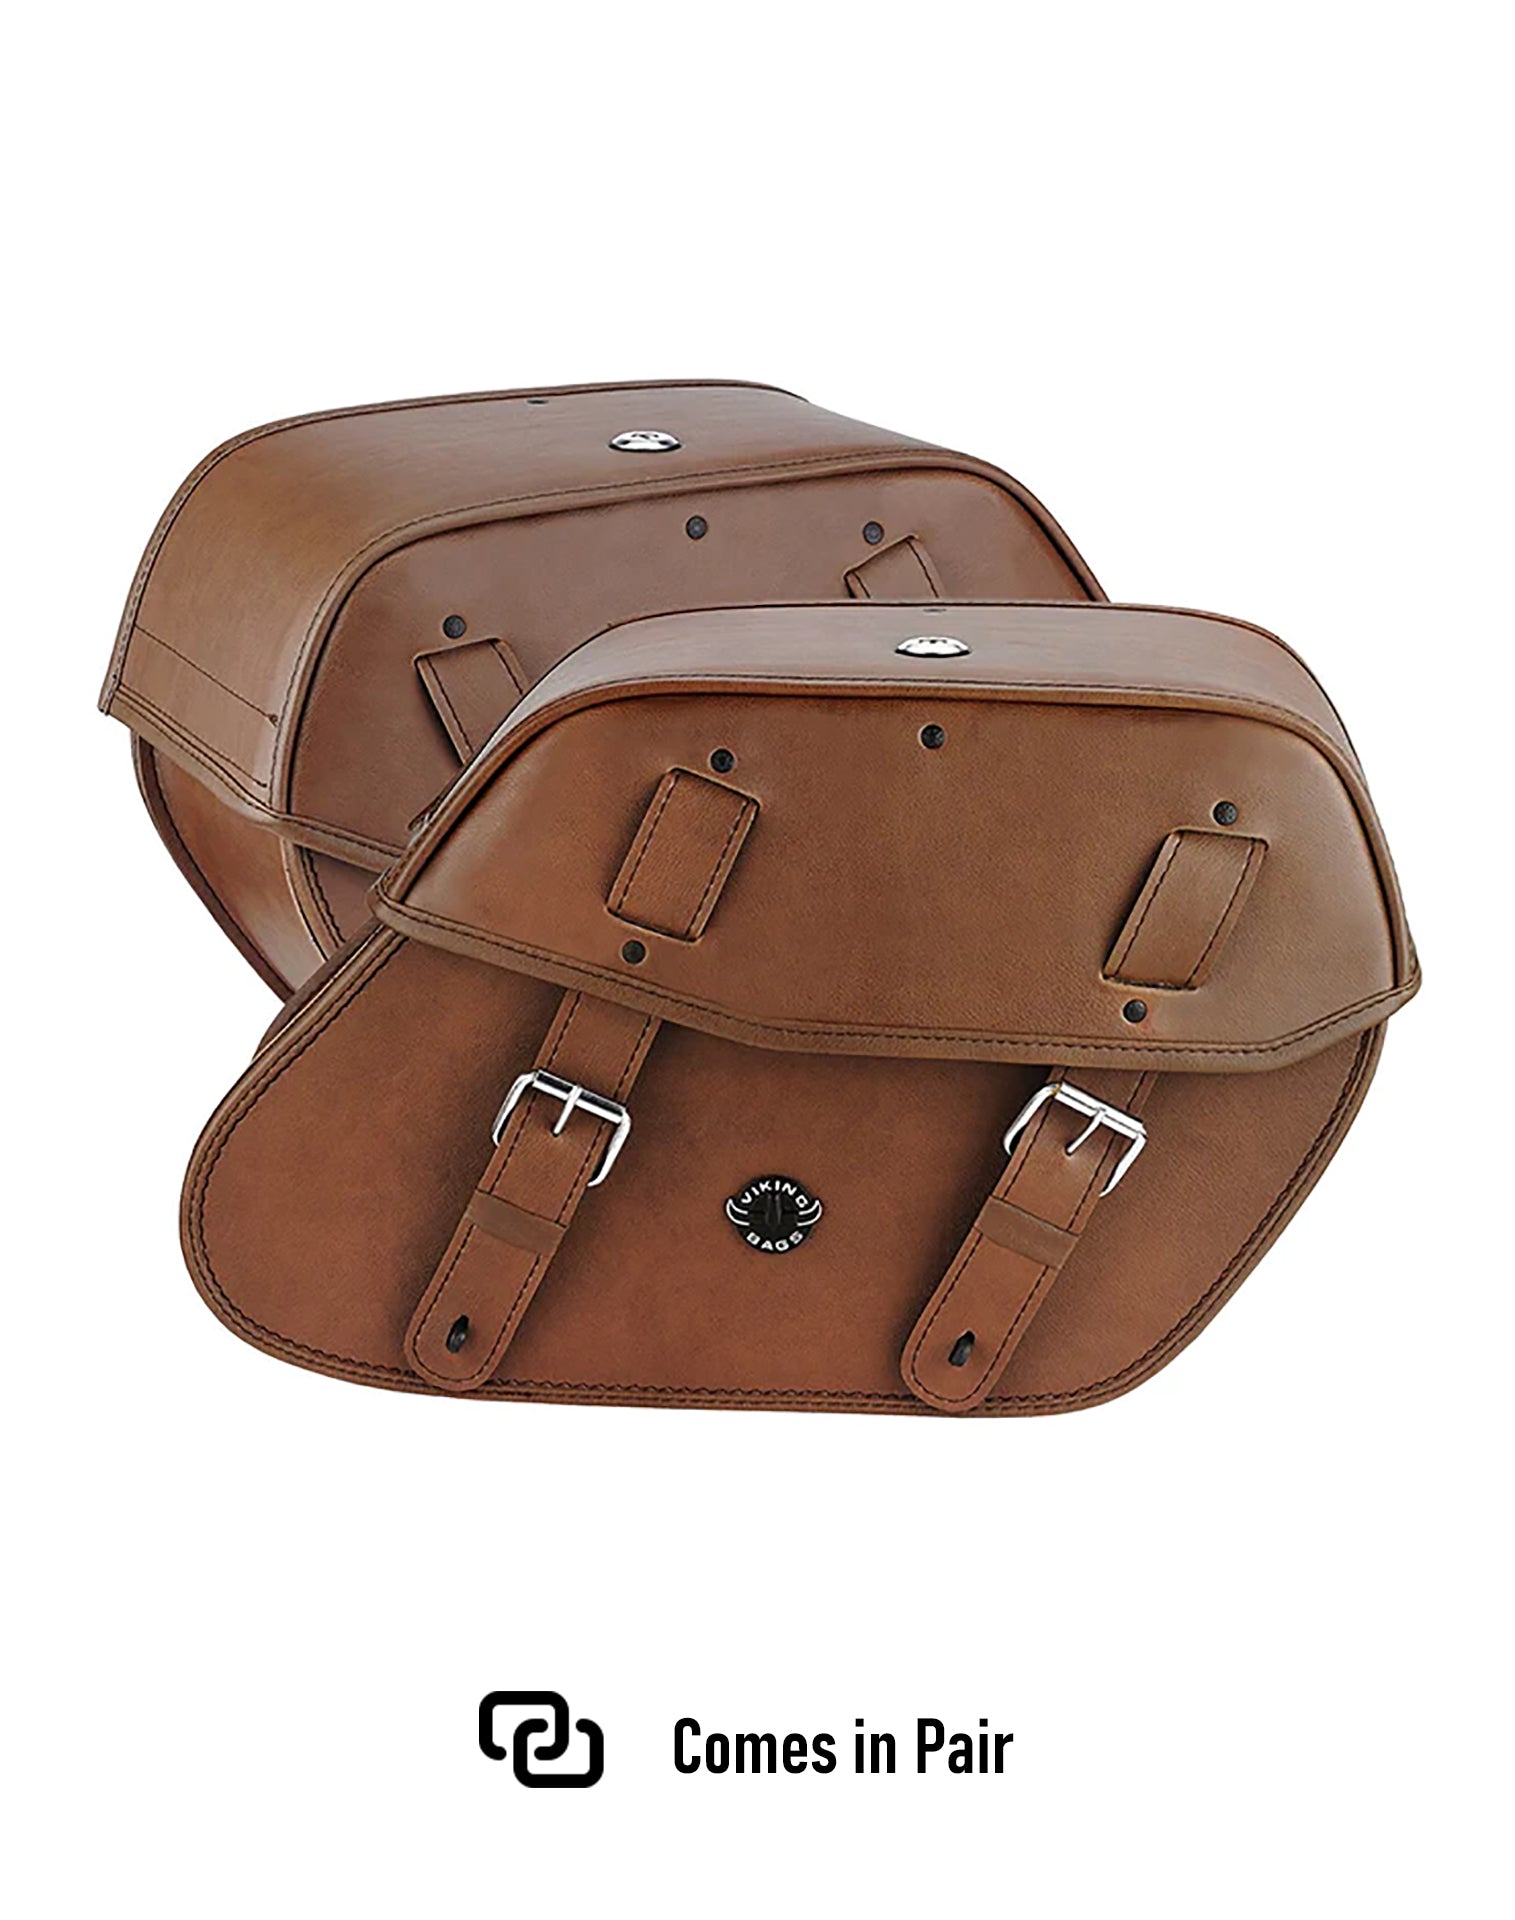 Viking Odin Brown Large Triumph America Leather Motorcycle Saddlebags Weather Resistant Bags Comes in Pair